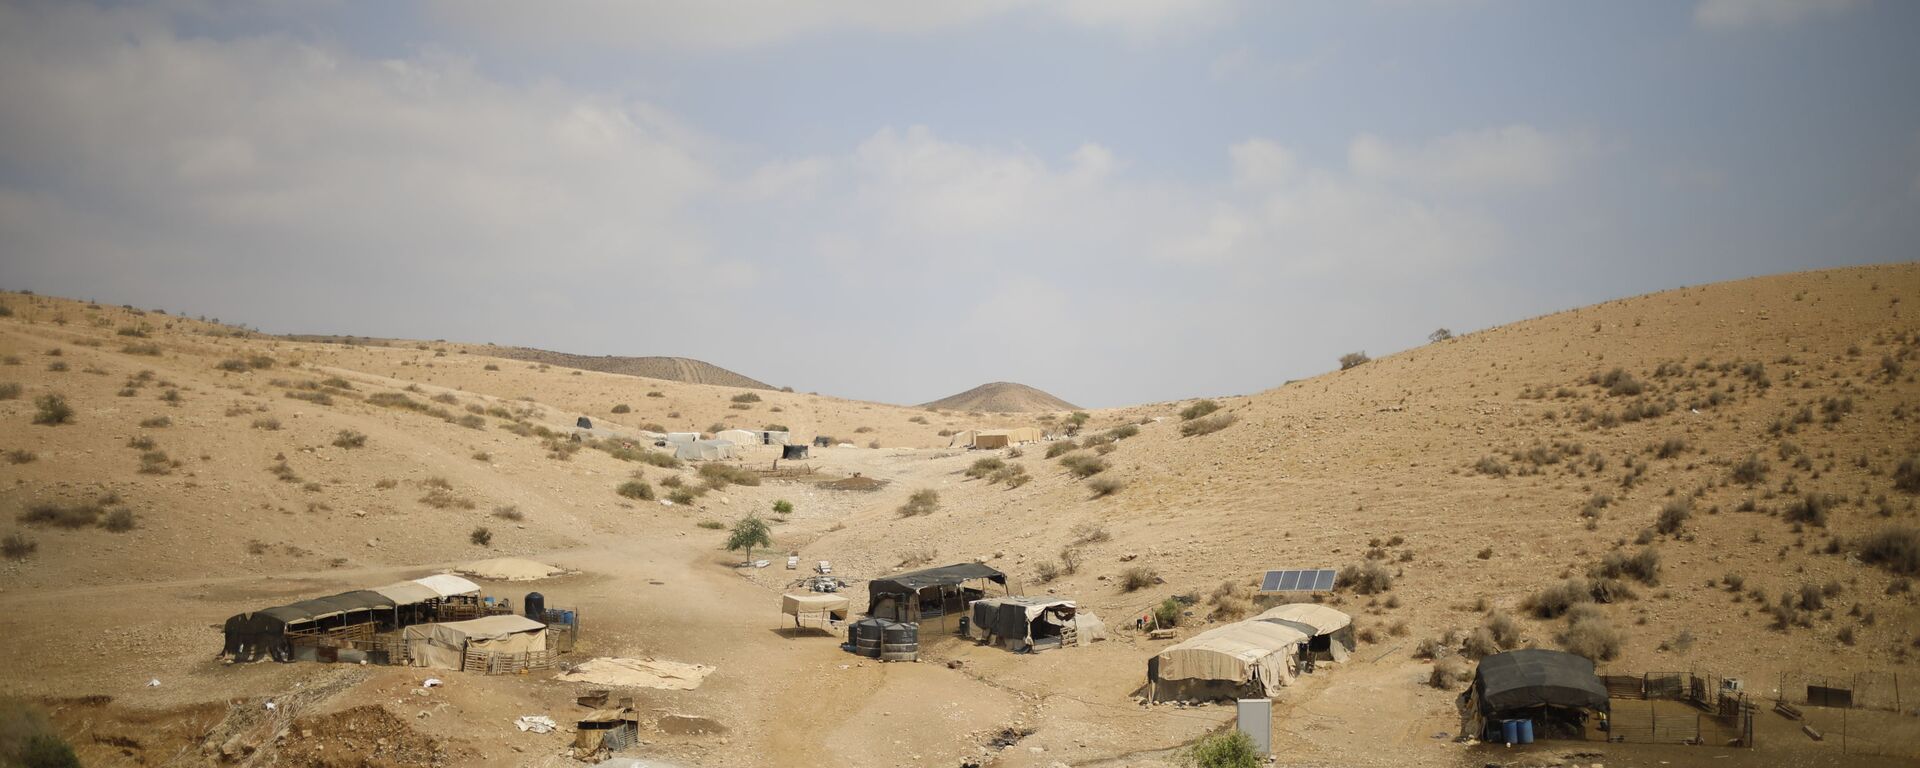 Palestinian Bedouin homes are seen in the Israeli-occupied West Bank, Wednesday, Sept. 11, 2019. Israeli Prime Minister Benjamin Netanyahu’s election eve vow to annex the Jordan Valley if he is re-elected has sparked an angry Arab rebuke and injected the Palestinians into a campaign that had almost entirely ignored them. (AP Photo/Ariel Schalit) - Sputnik International, 1920, 16.12.2019